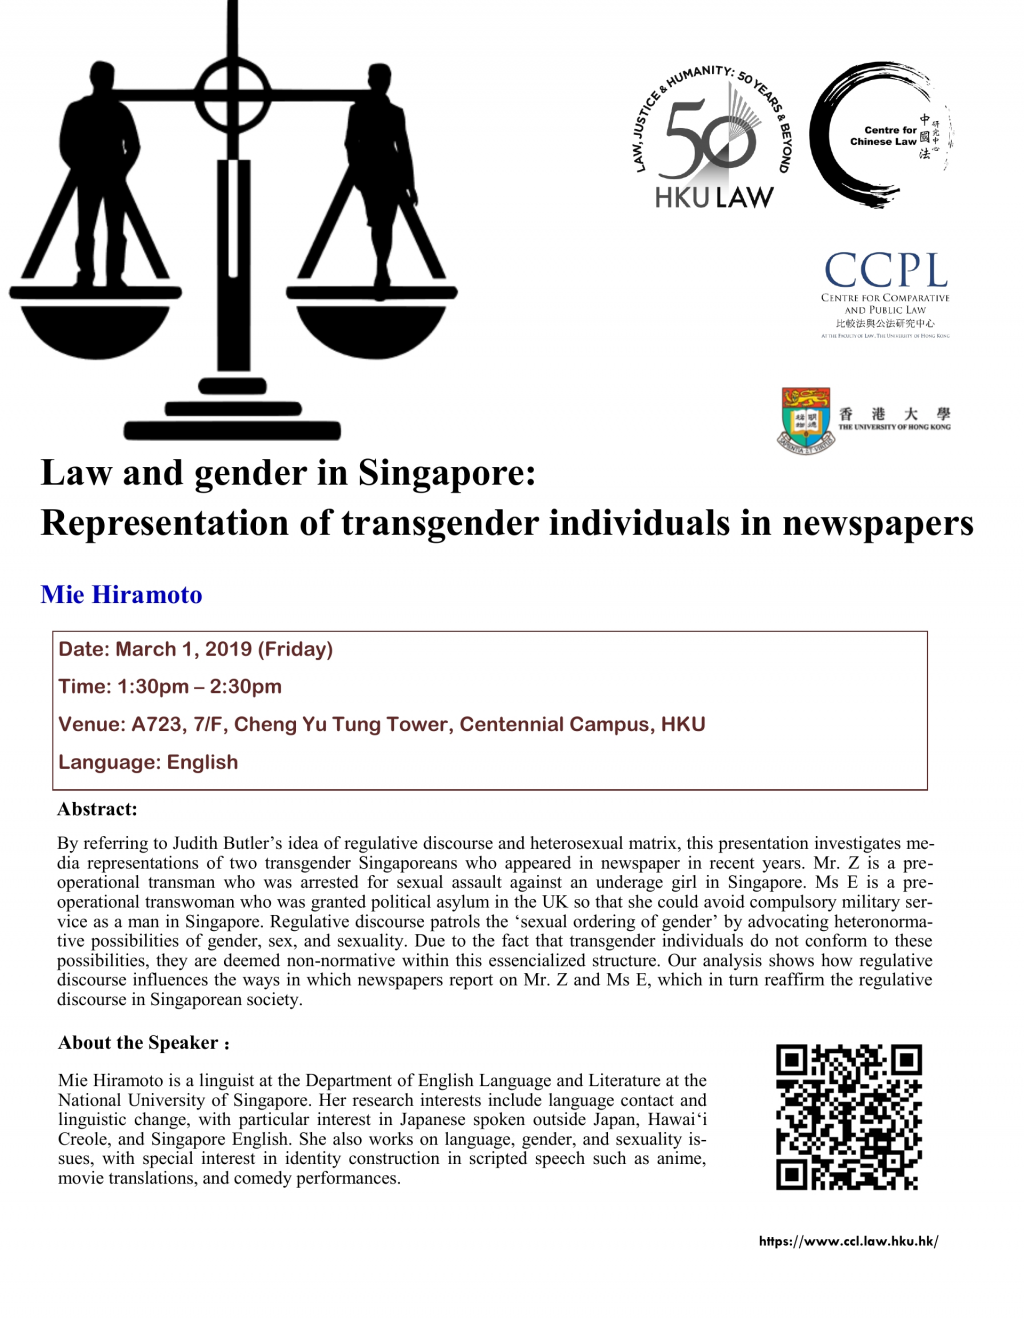 Law and gender in Singapore: Representation of transgender individuals in newspapers